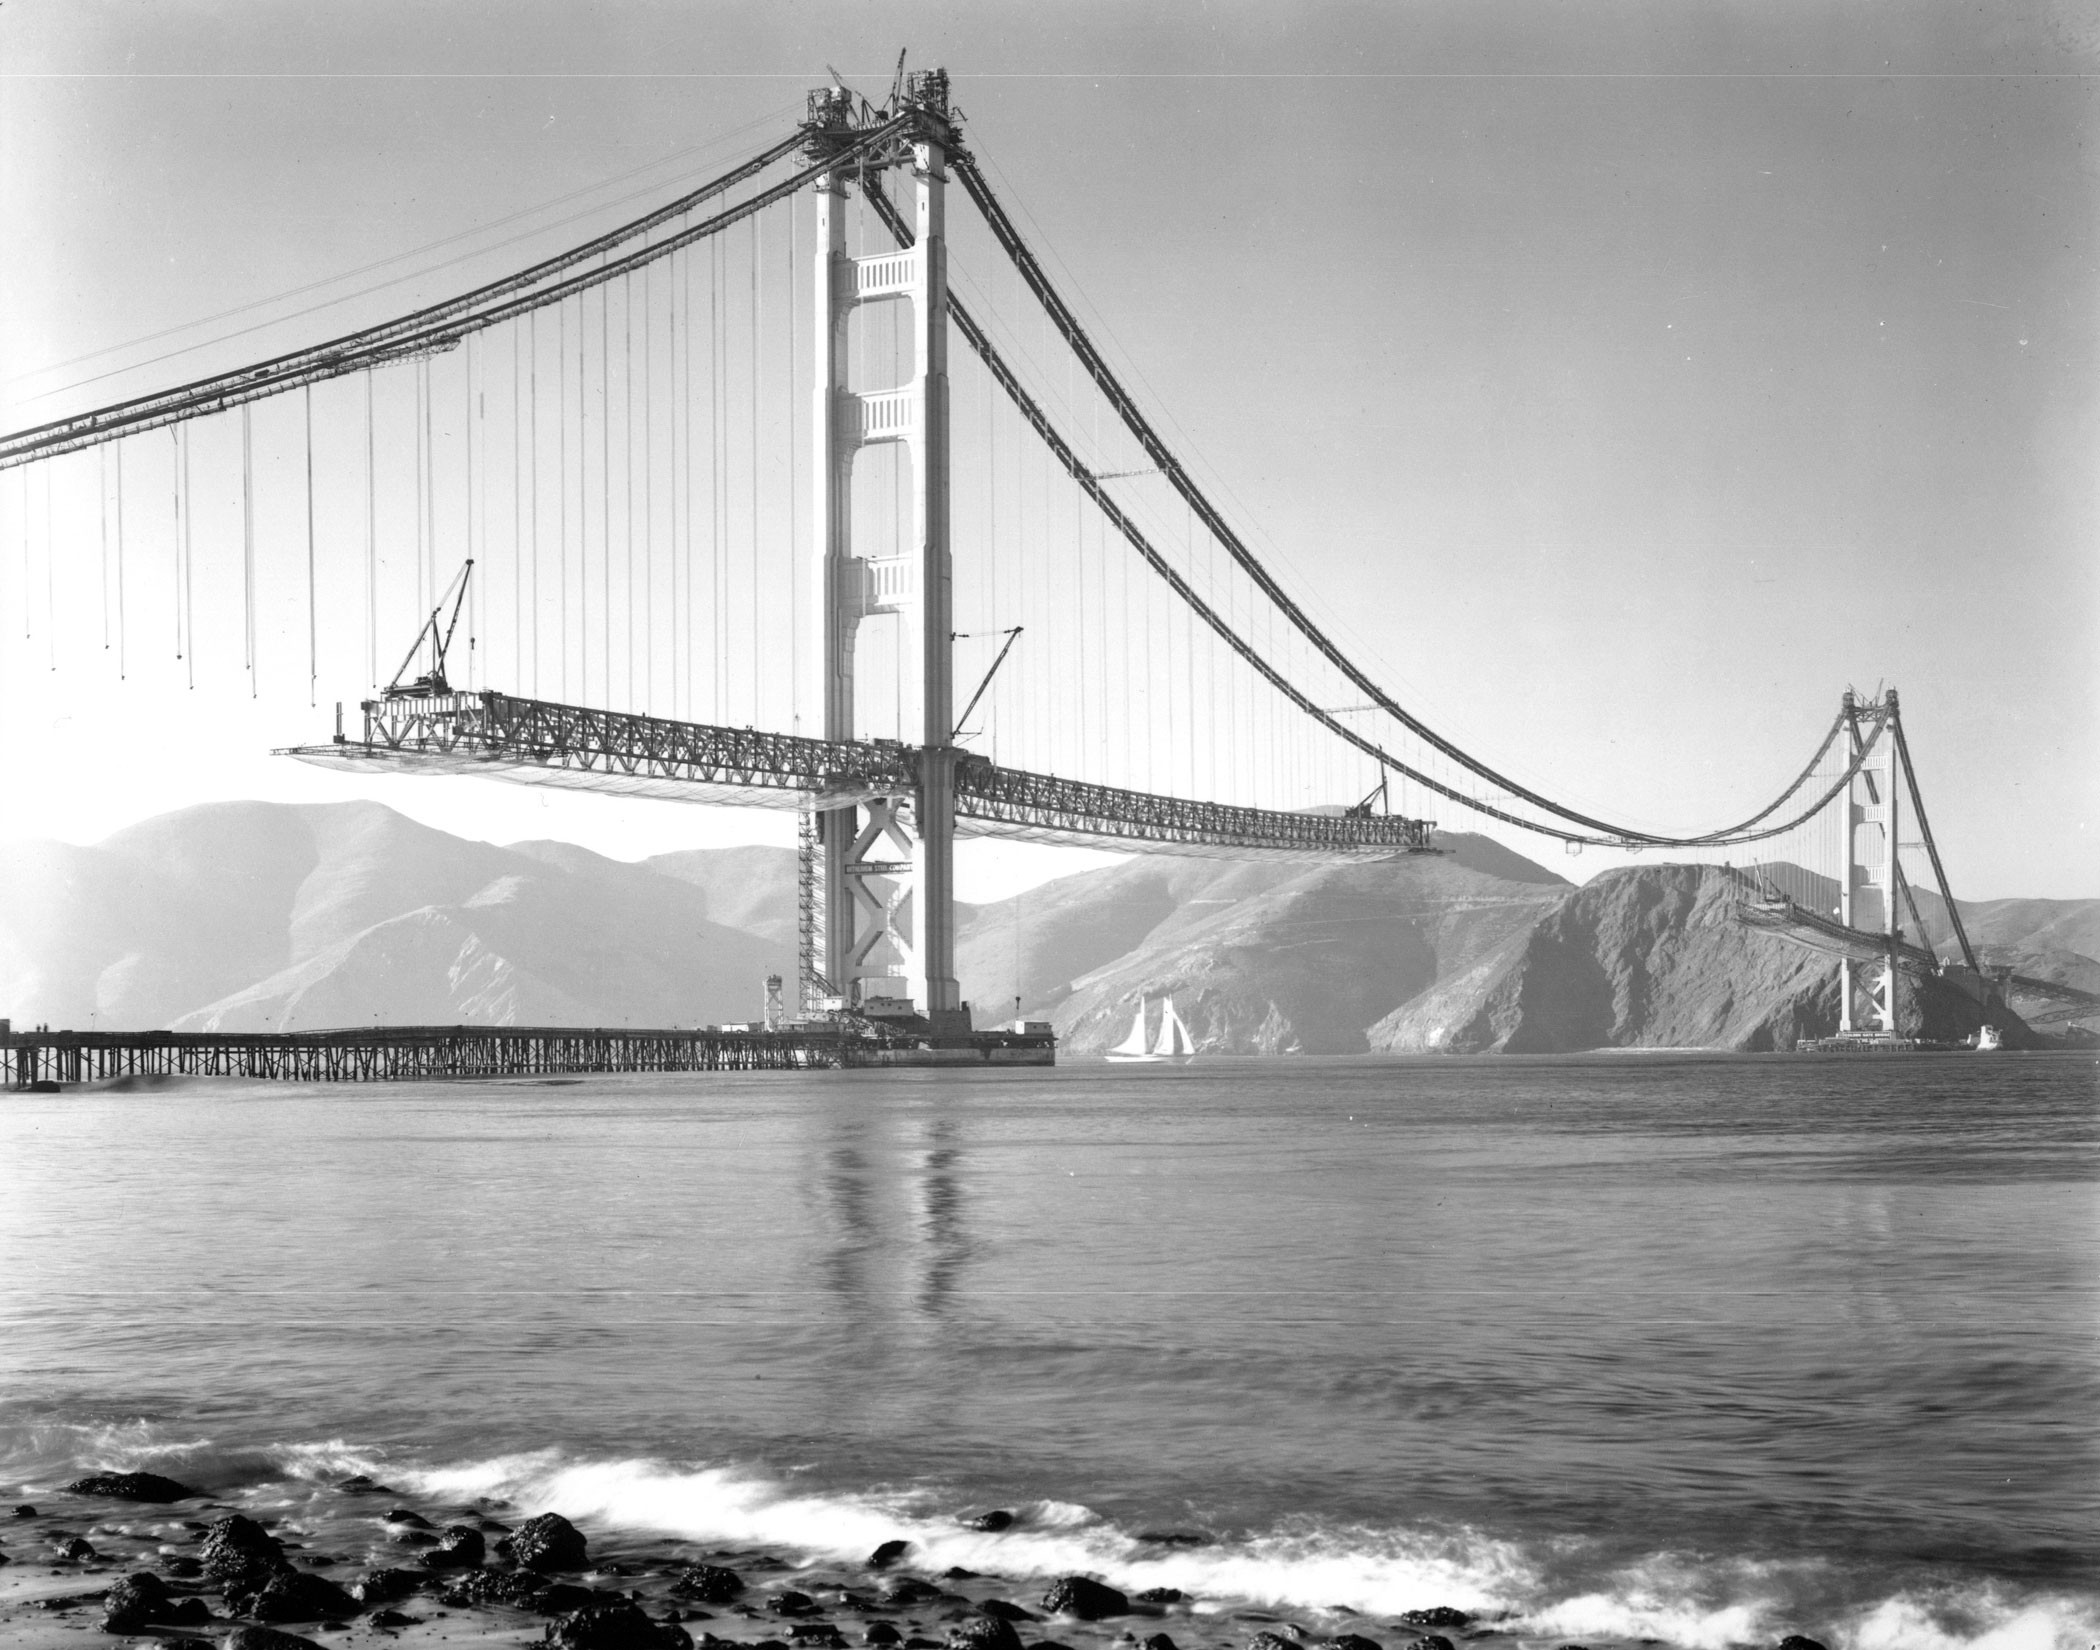 The Golden Gate bridge being constructed in San Francisco, 1937